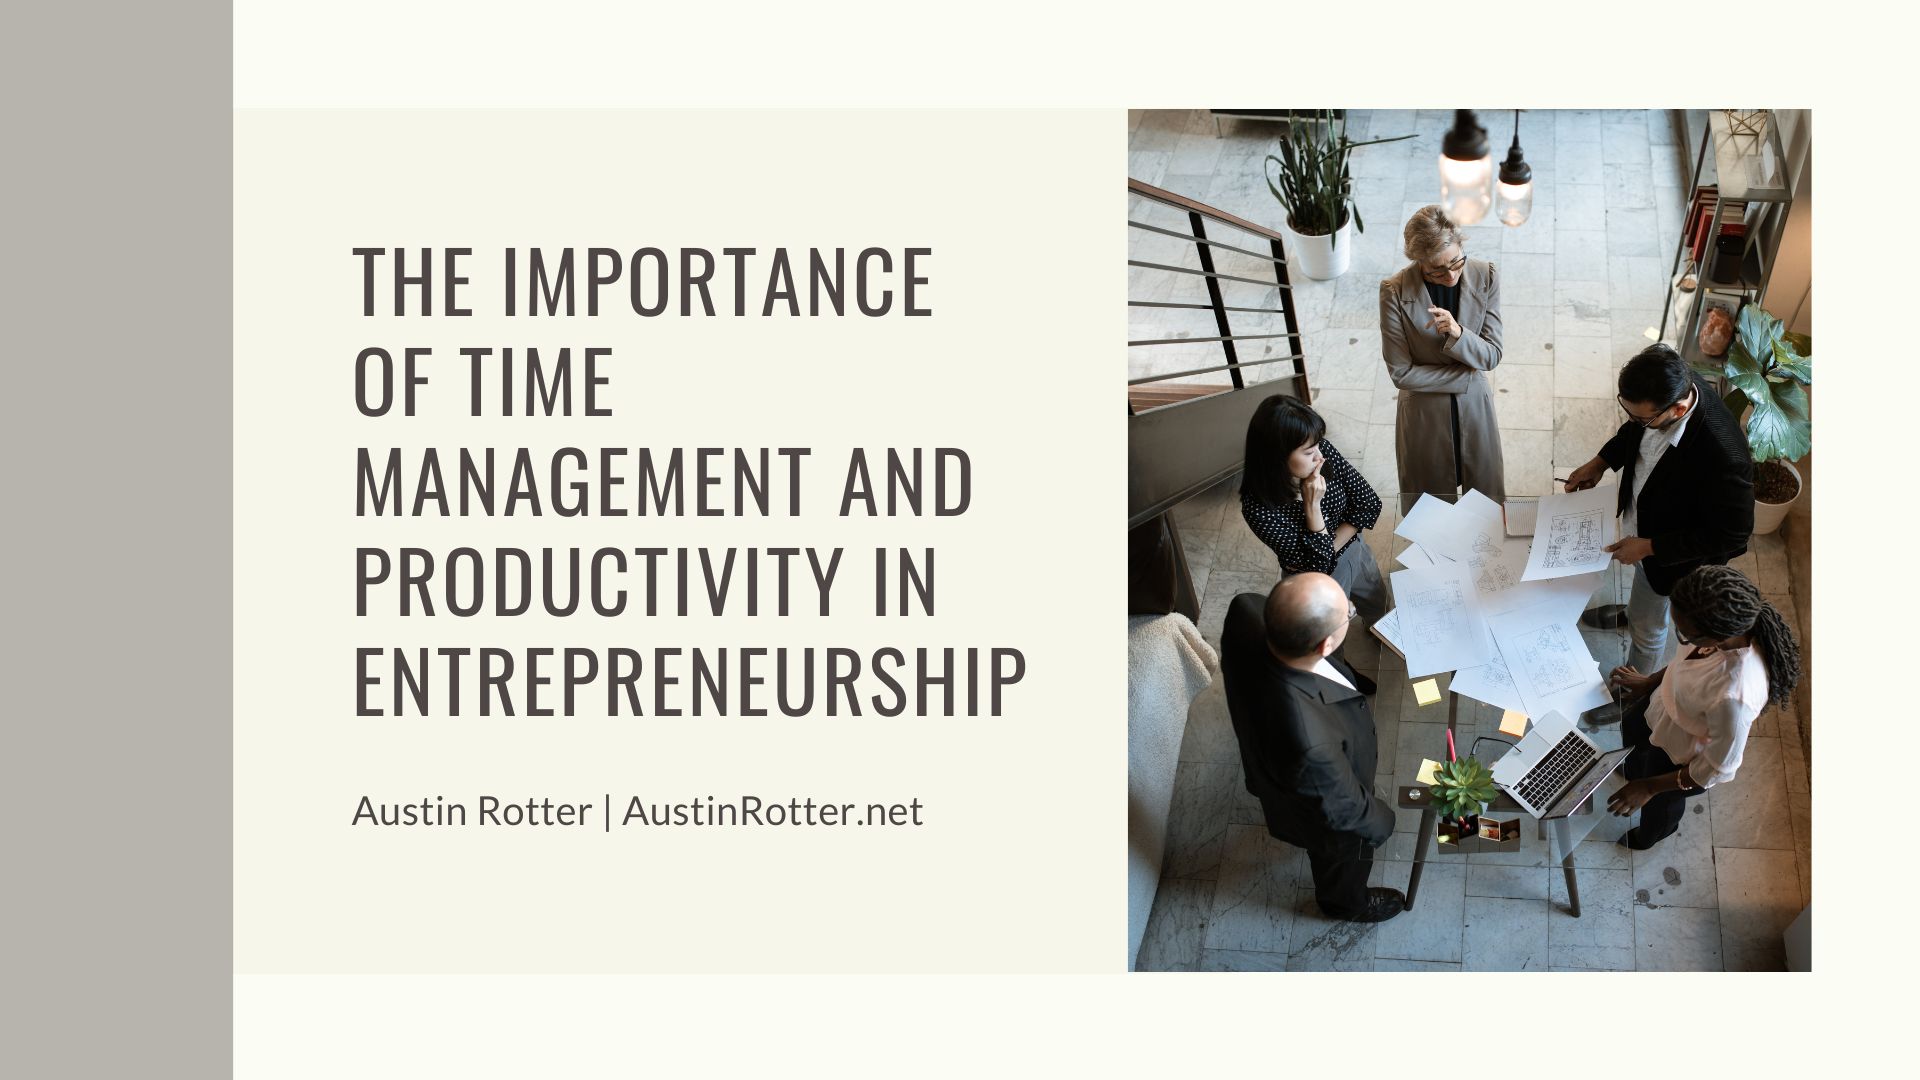 THE IMPORTANCE
OF TIME
MANAGEMENT AND
PRODUCTIVITY IN
ENTREPRENEURSHIP

Austin Rotter | AustinRotter.net